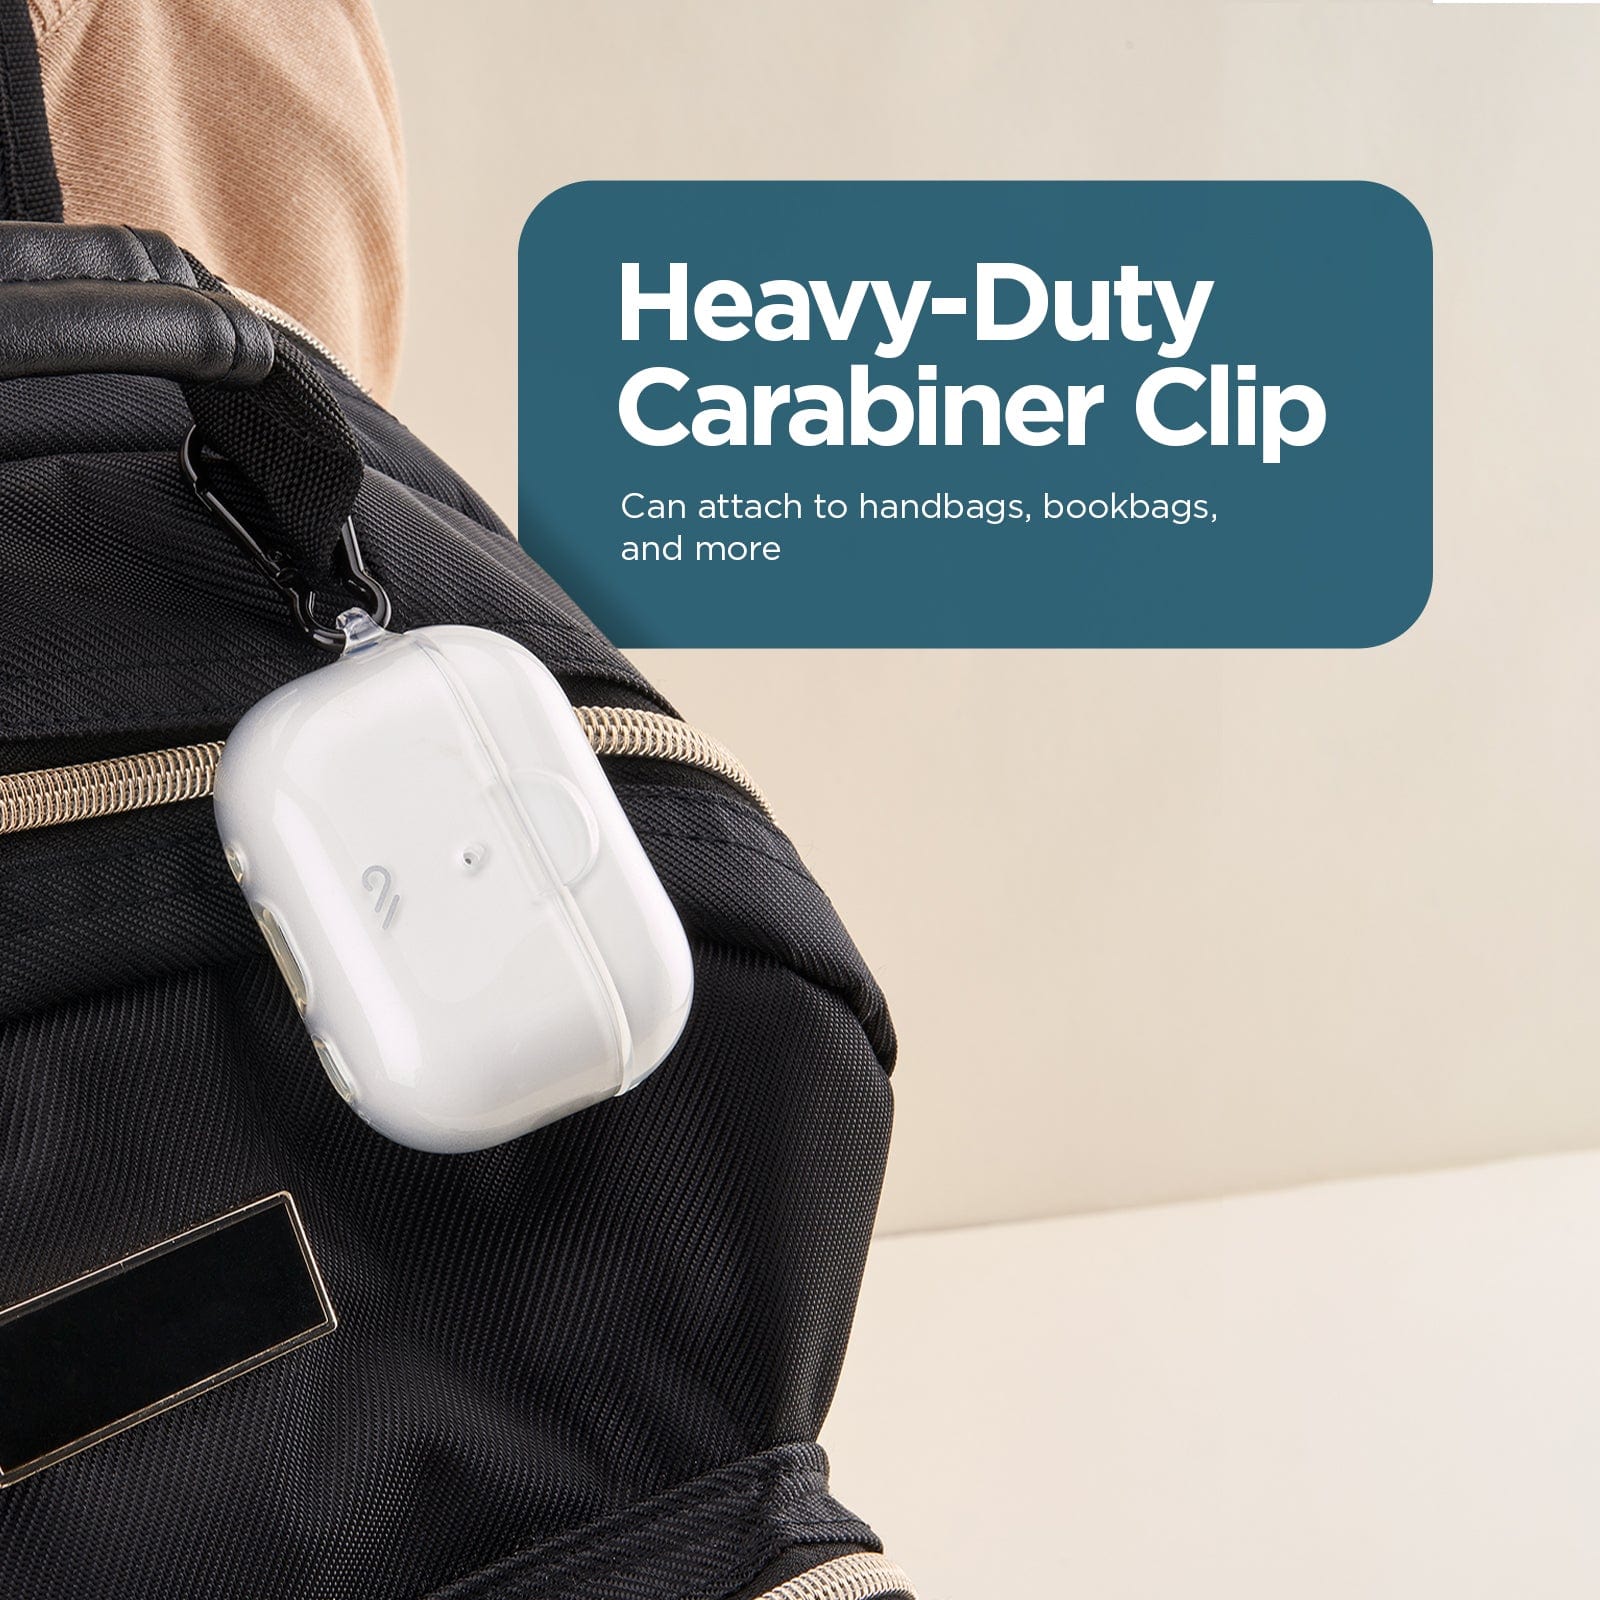 HEAVY DUTY CARABINER CLIP CAN ATTACH TO HANDBAGS, BOOKBAGS, AND MORE